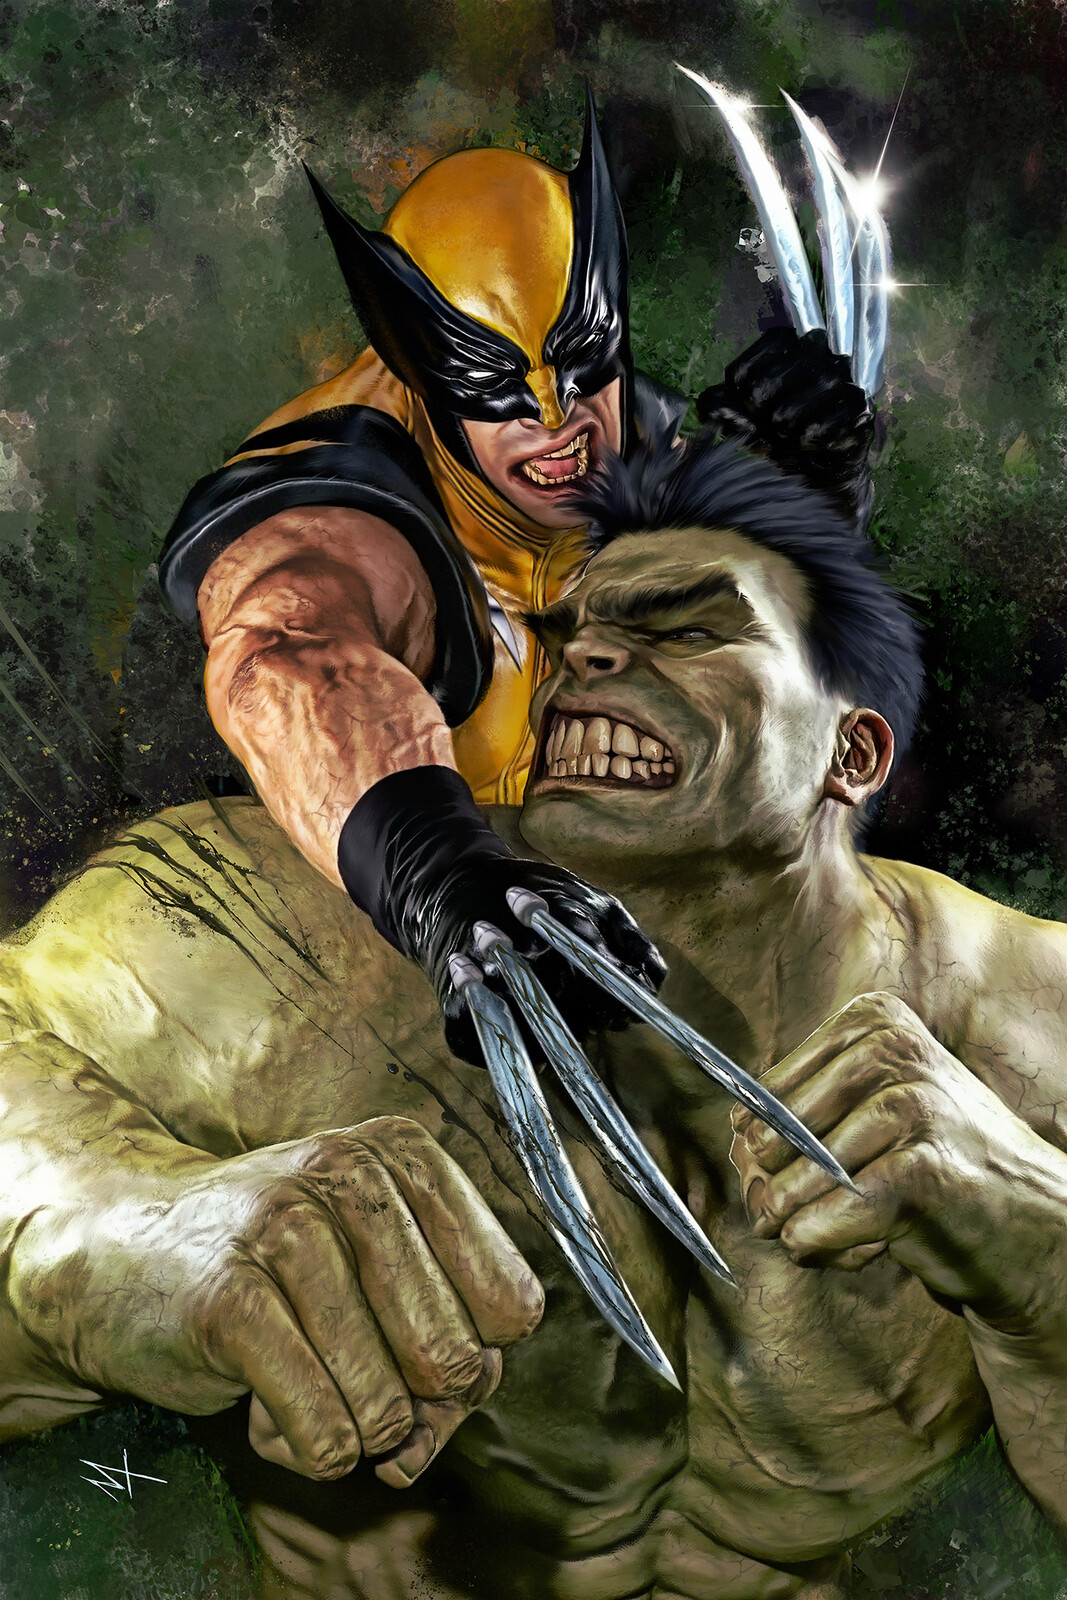 X Lives of Wolverine #1 by Turini